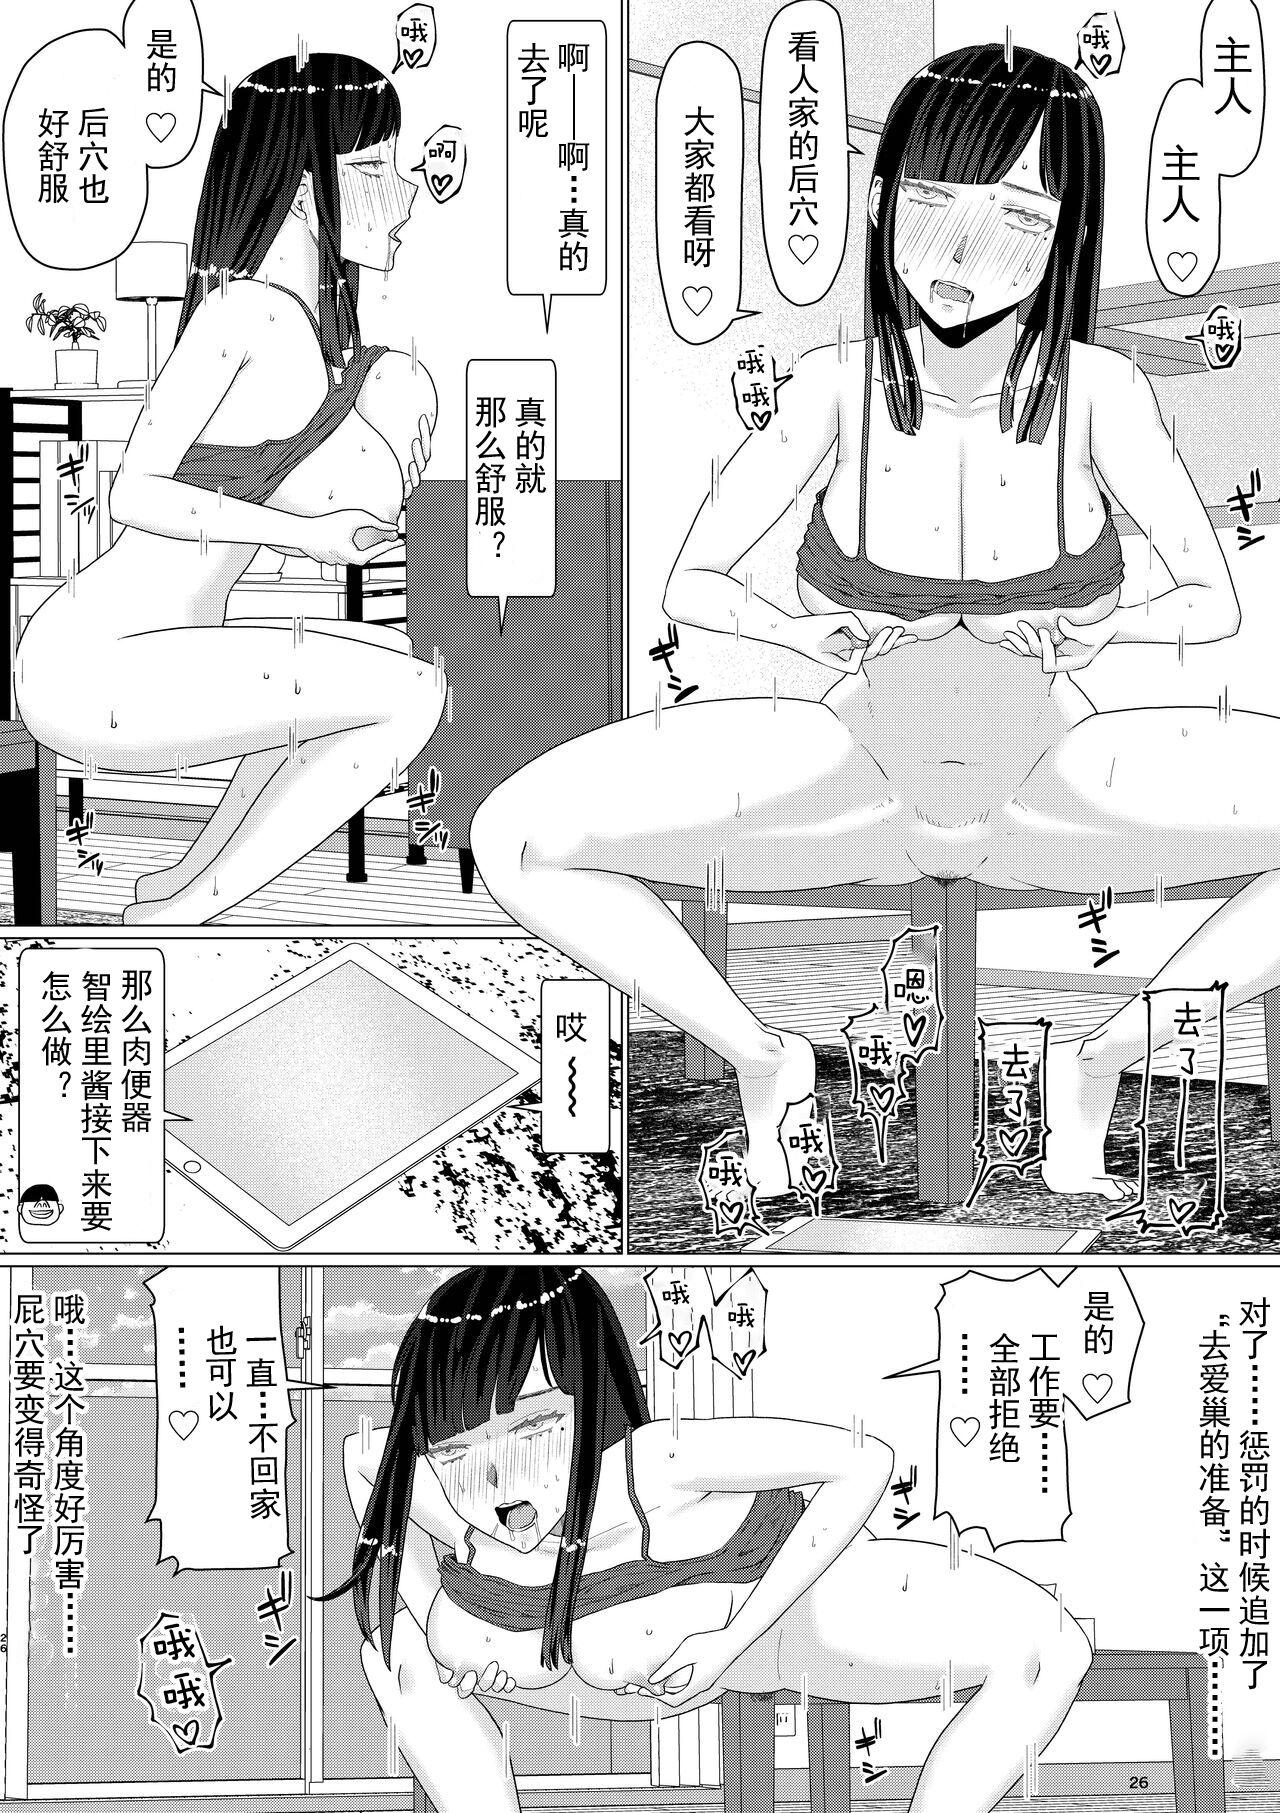 Chieri can't lose! 3 -Perverted toilet wife who fertilizes anyone's sperm with her husband's official approval- Volume 2 [Chinese] [超勇漢化組] 26